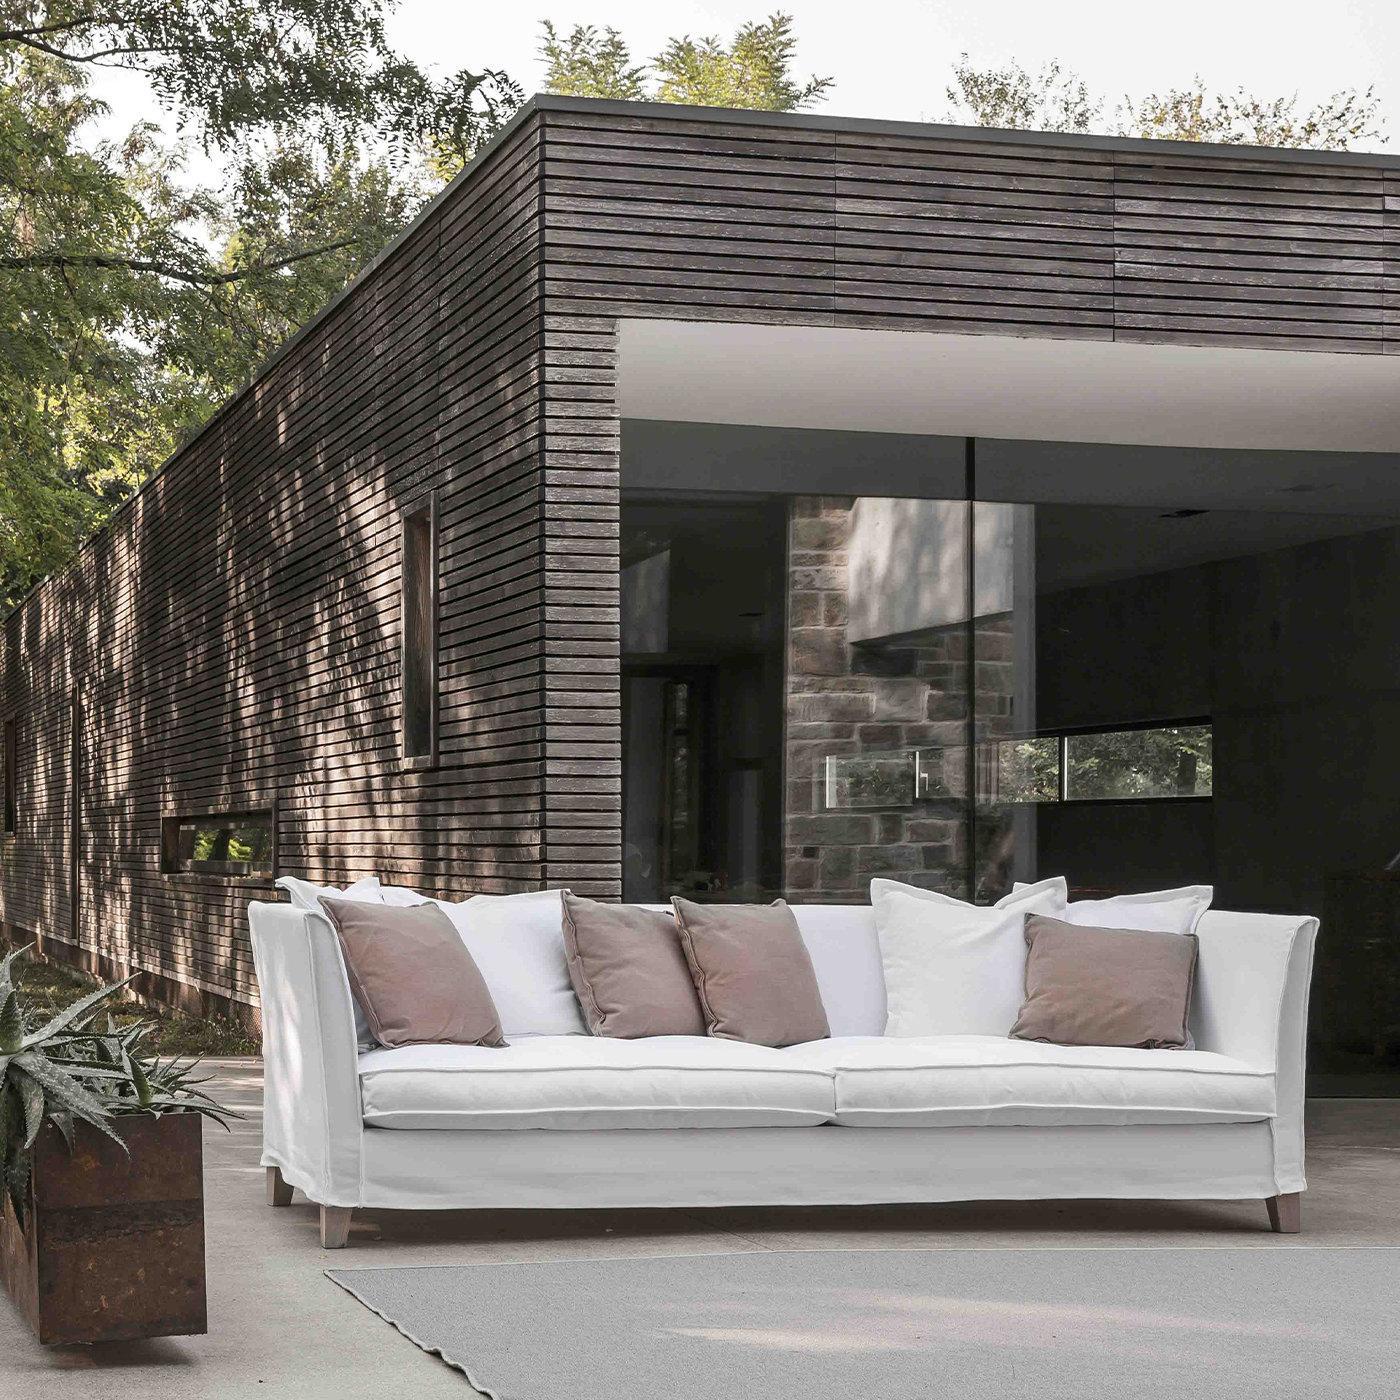 This clean-lined sofa raised on varnished wooden feet will elevate an outdoor lounge with its simple elegance. Polyurethane padding with waterproof lining pads the solid wooden structure, upholstered with white fabric (removable) marked by